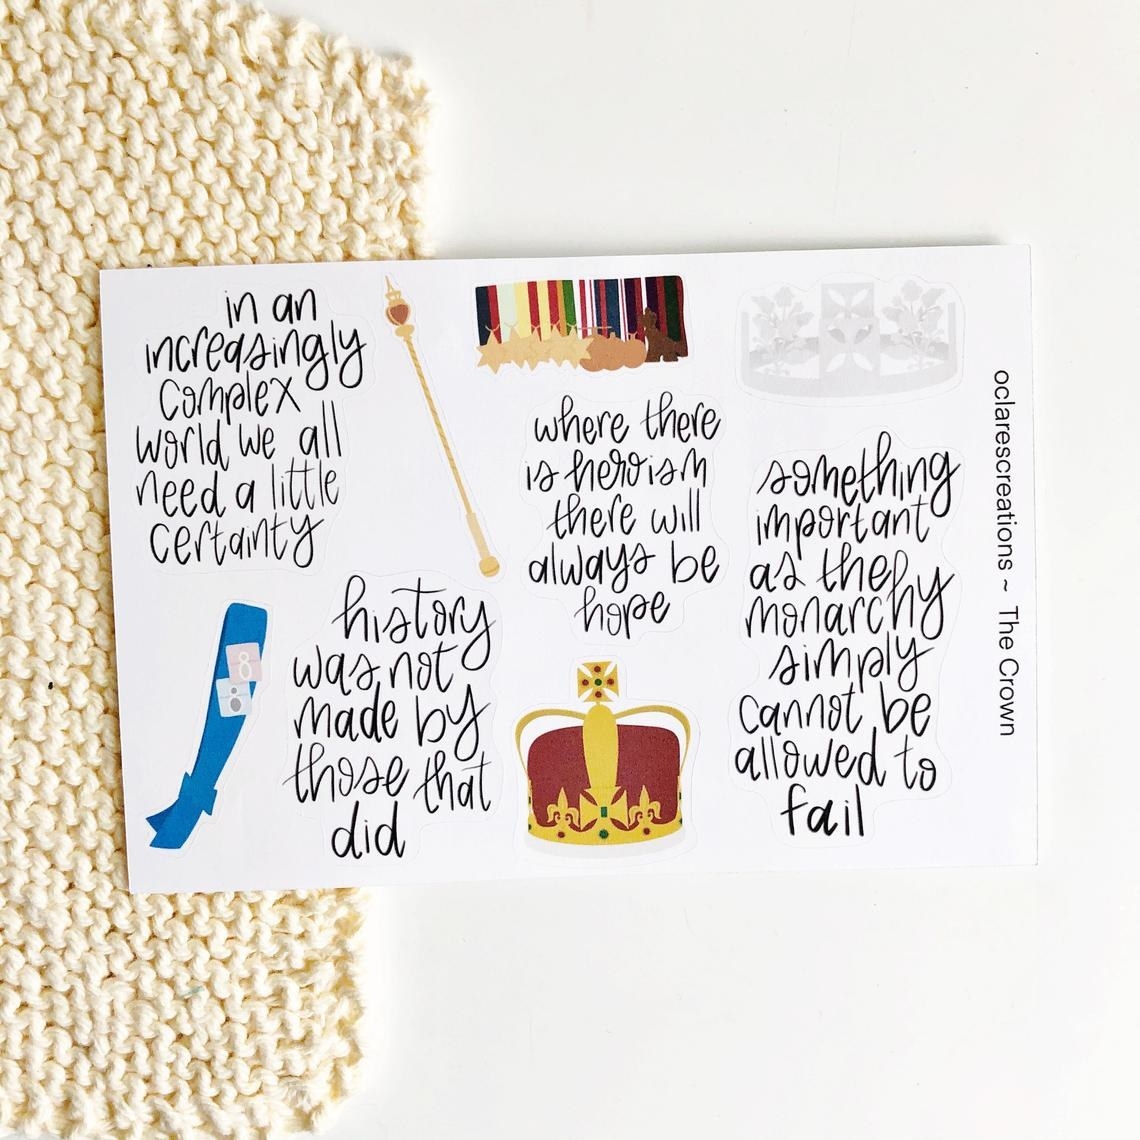 A sheet of stickers that have quotes from The Crown like &quot;history was not made by those that did&quot; and &quot;in an increasingly complex would we all need a little certainty,&quot; as well as drawings of royal garb like a crown, a sash, and a scepter